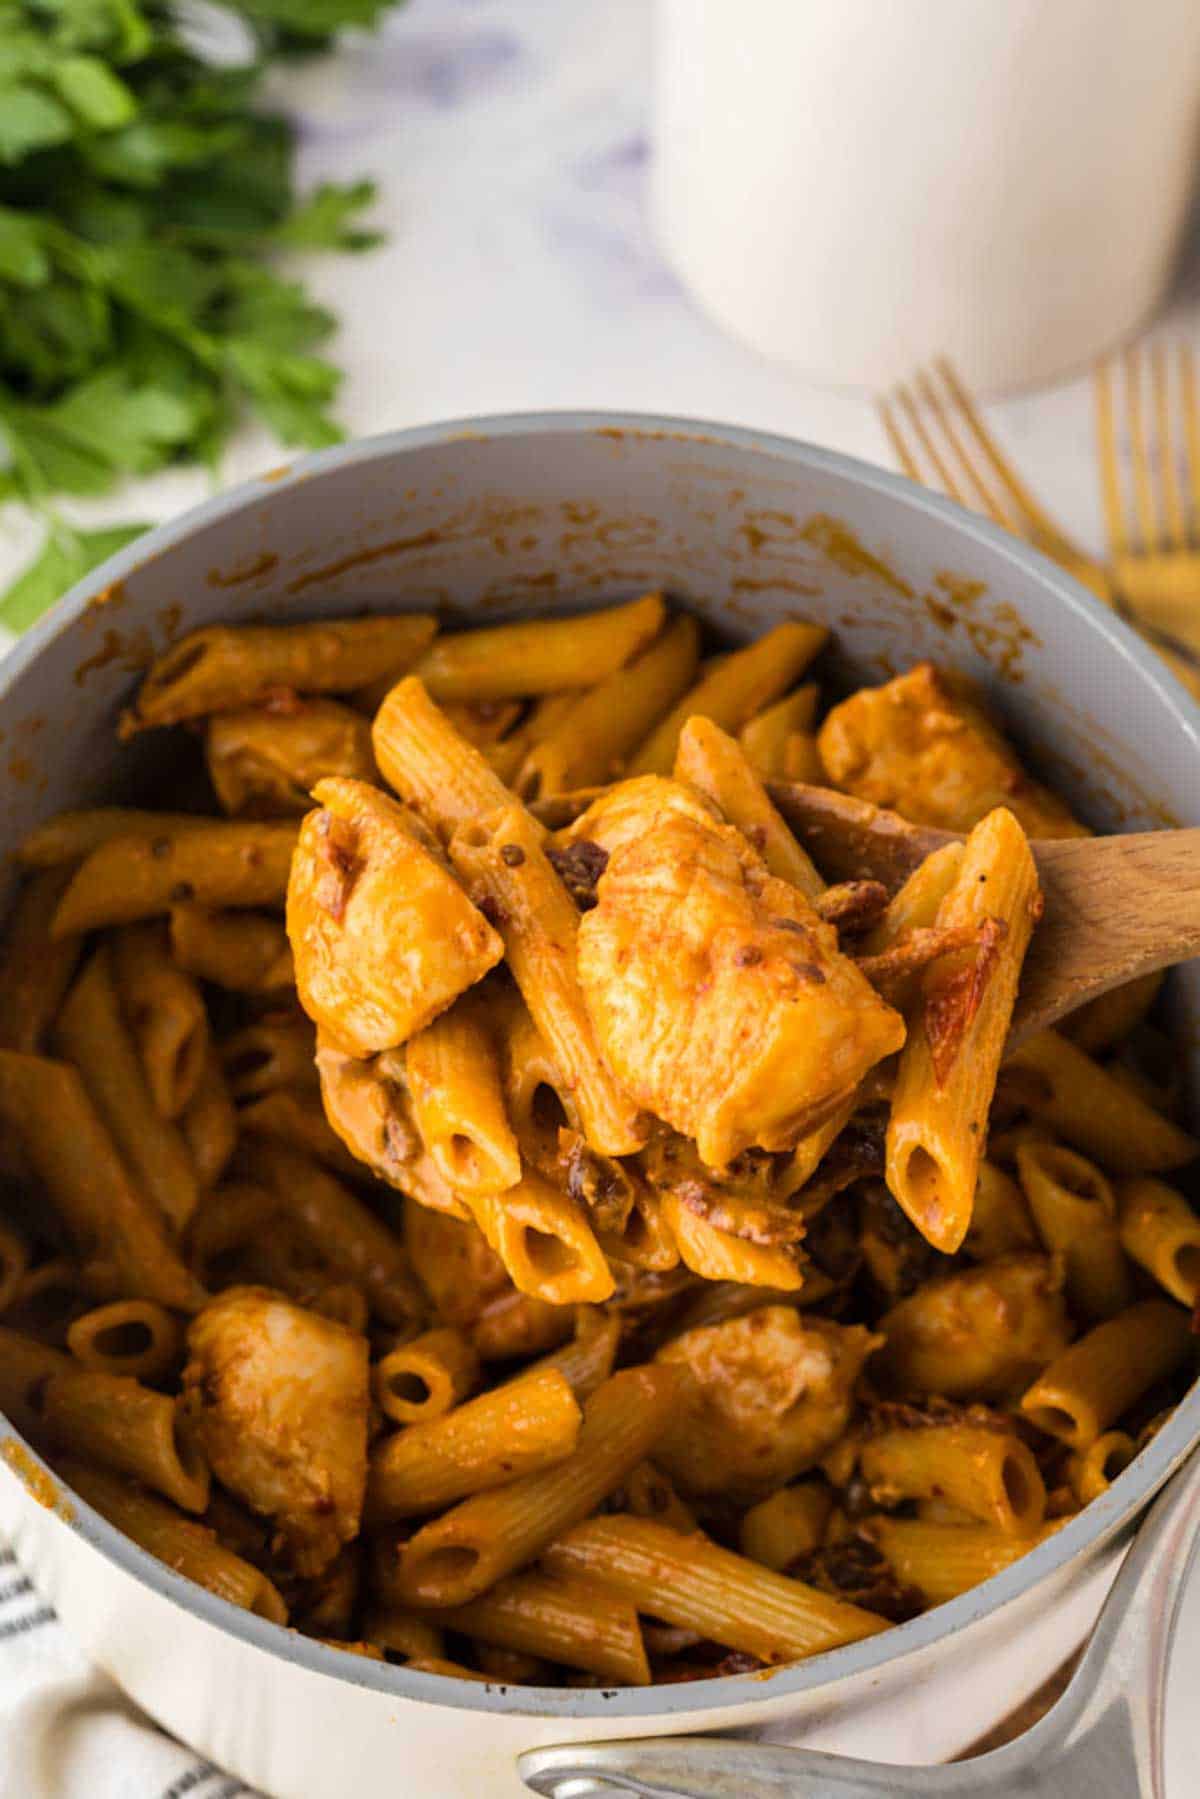 Spicy chipotle chicken pasta on a wooden spoon.